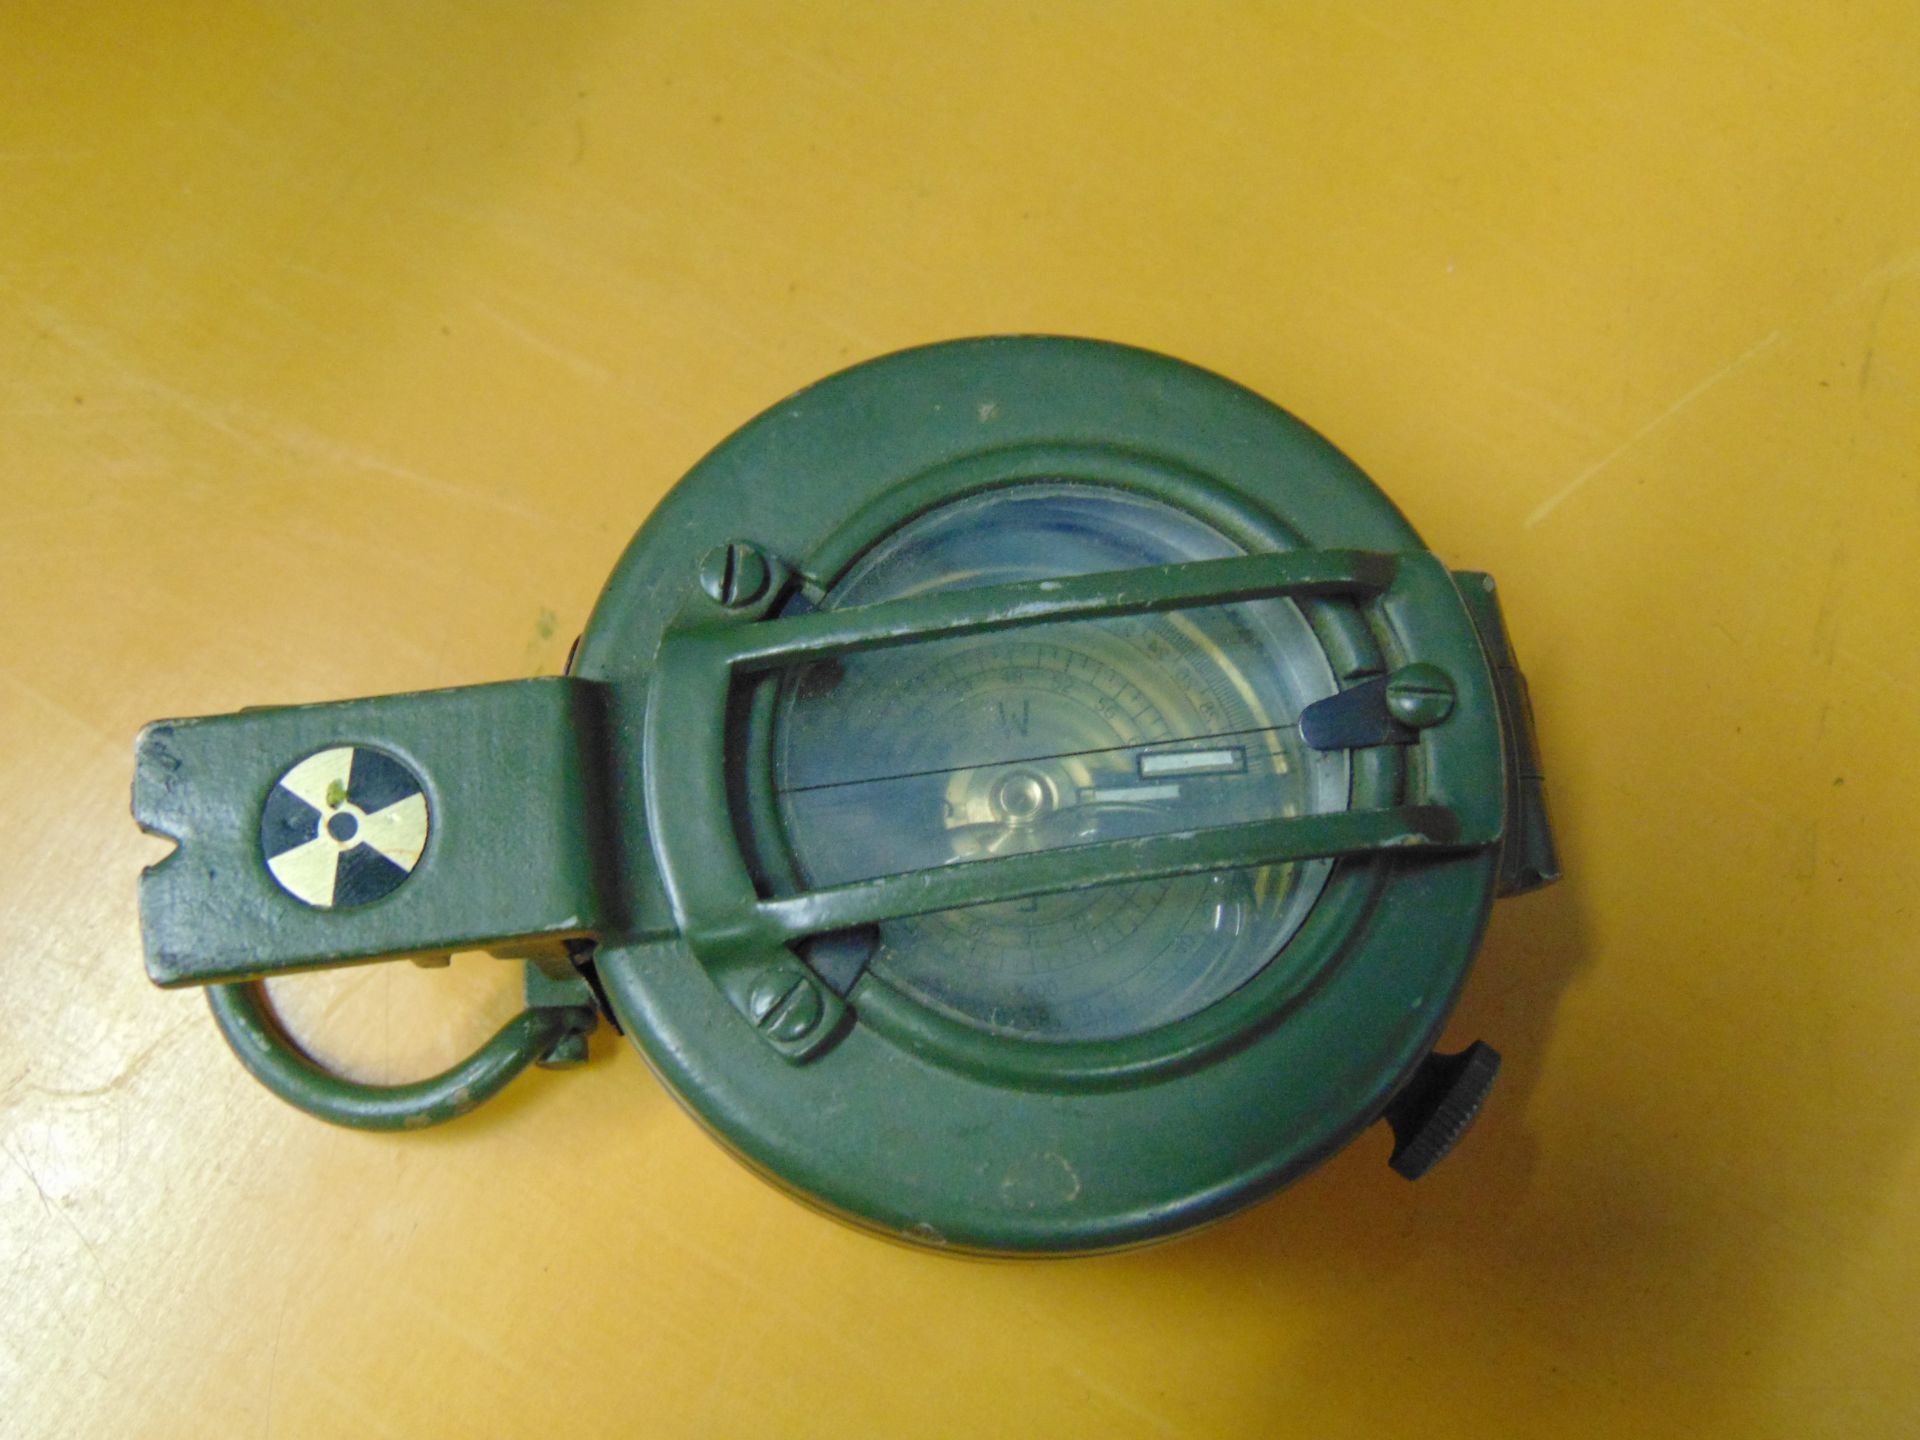 Stanley Prismatic Marching Compass - Image 3 of 4